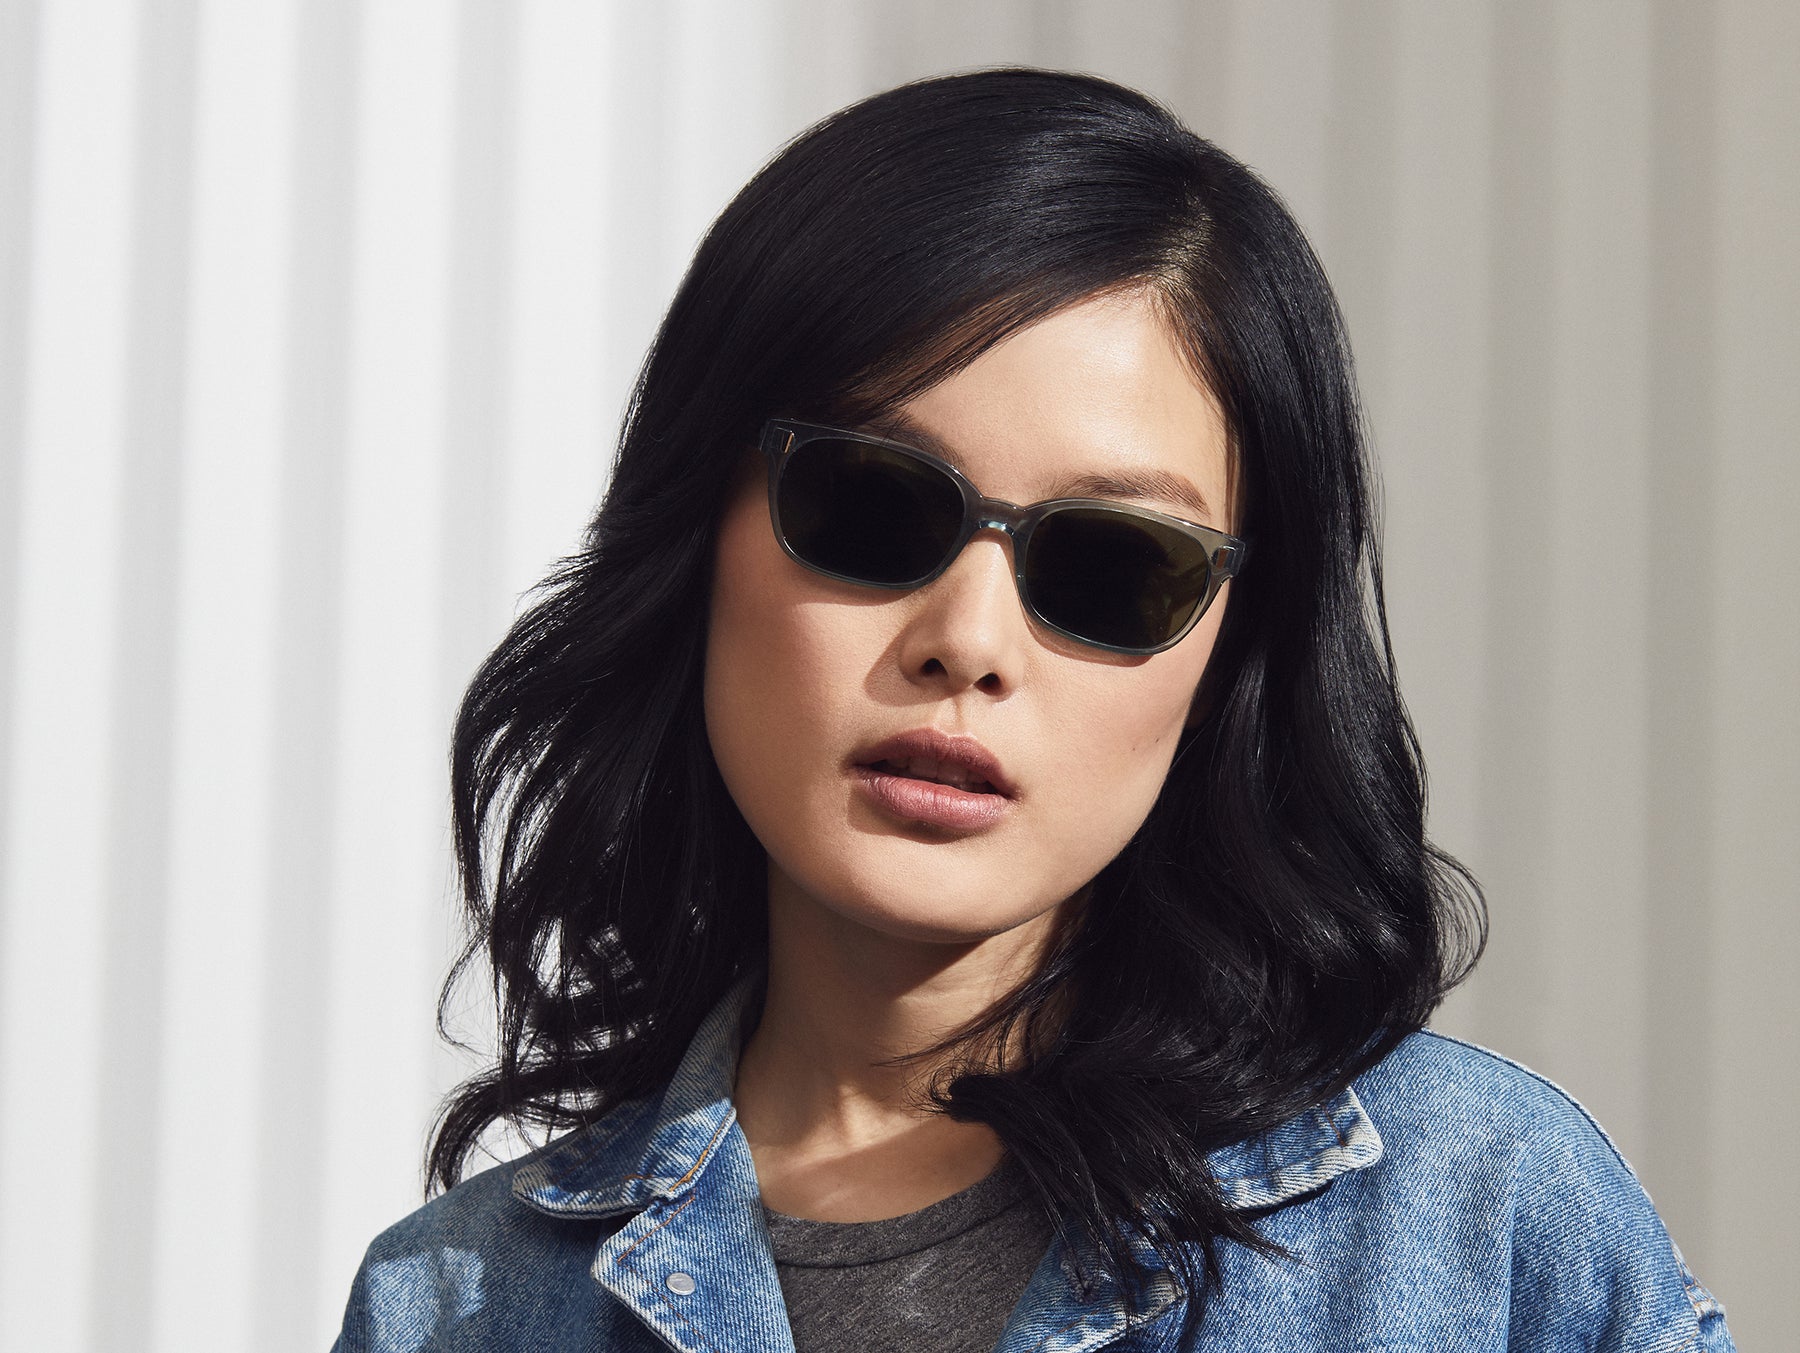 Model is wearing The EMIS SUN in Blue Smoke with G-15 Glass Lenses